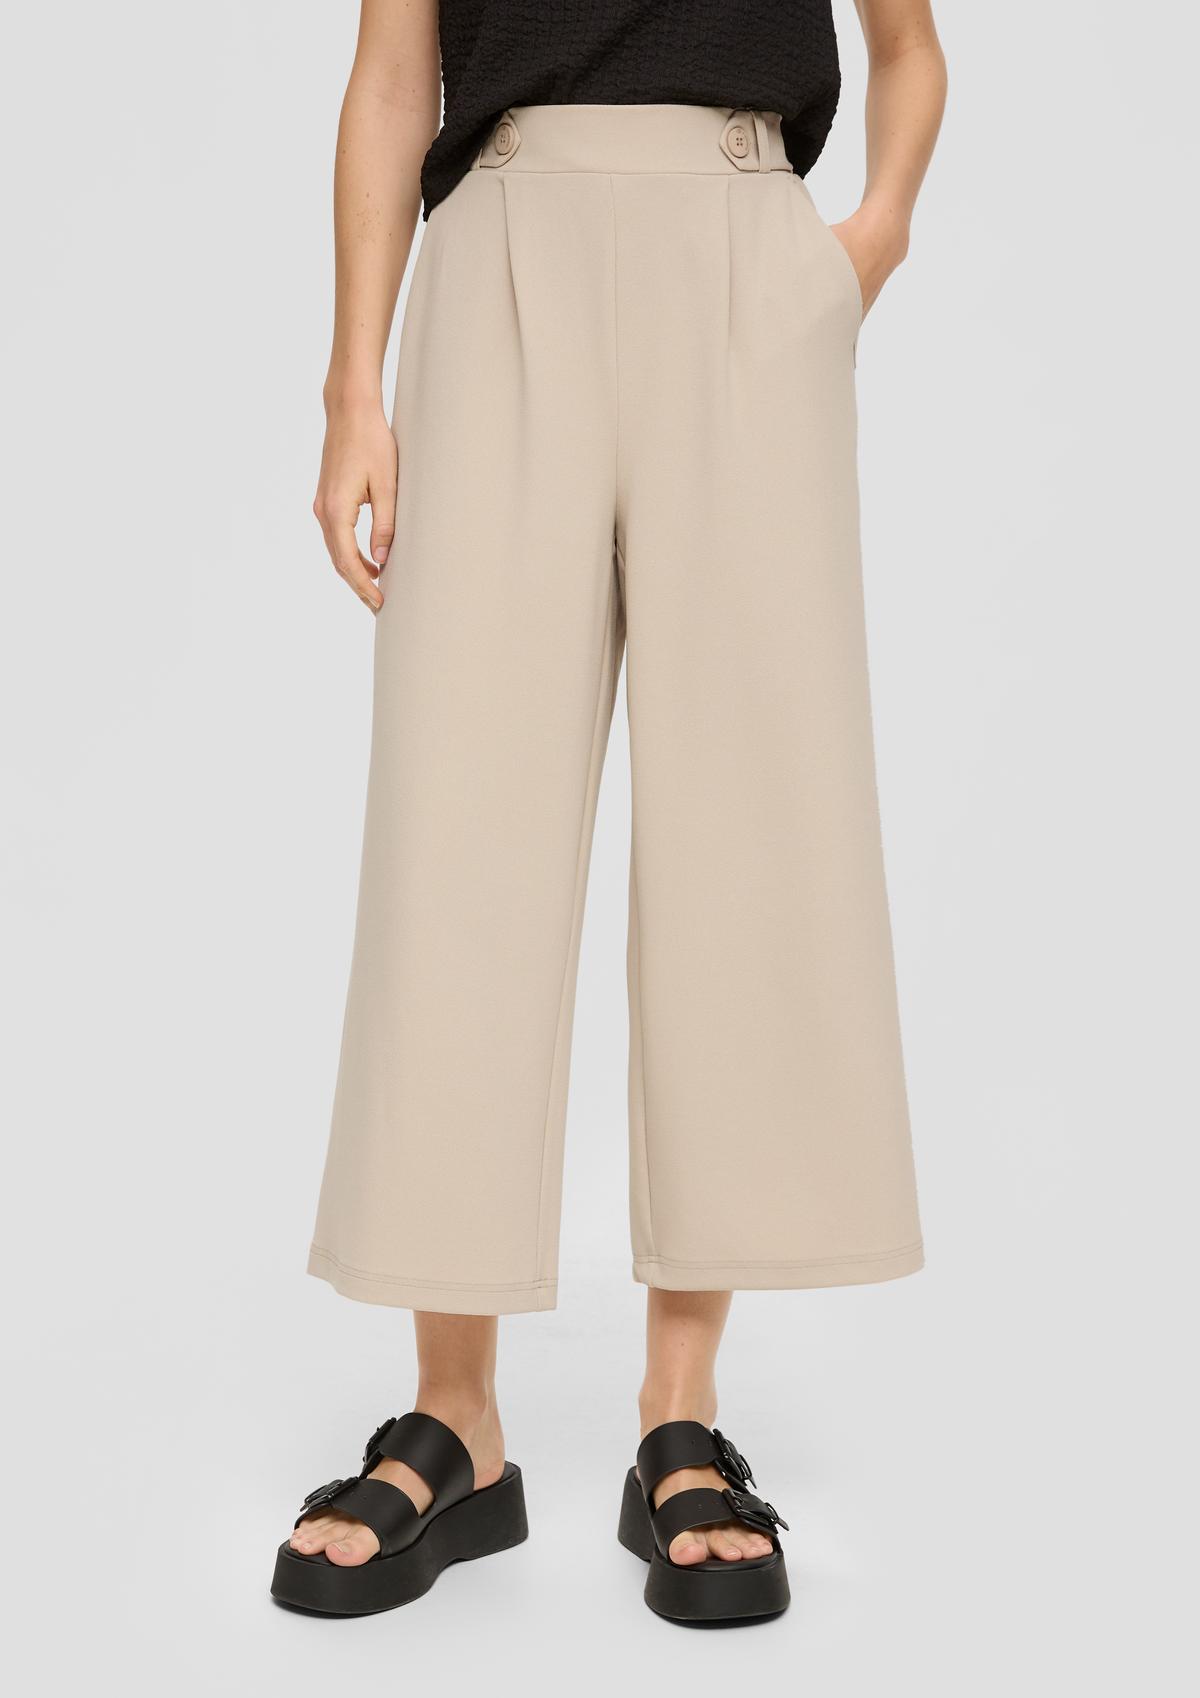 s.Oliver Interlock jersey trousers with an elasticated waistband